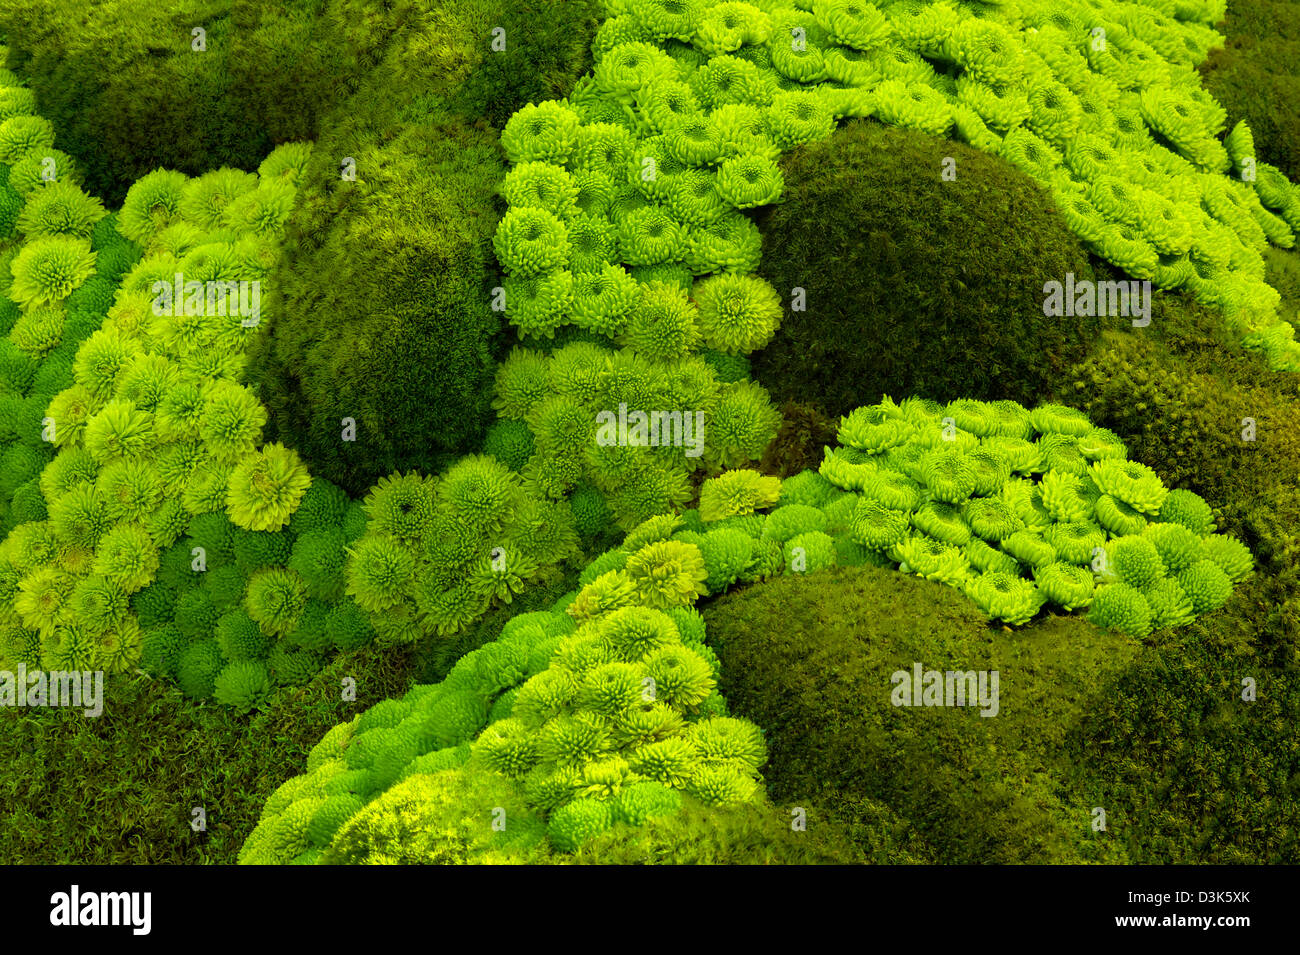 Mosses and rock garden succulents. Stock Photo